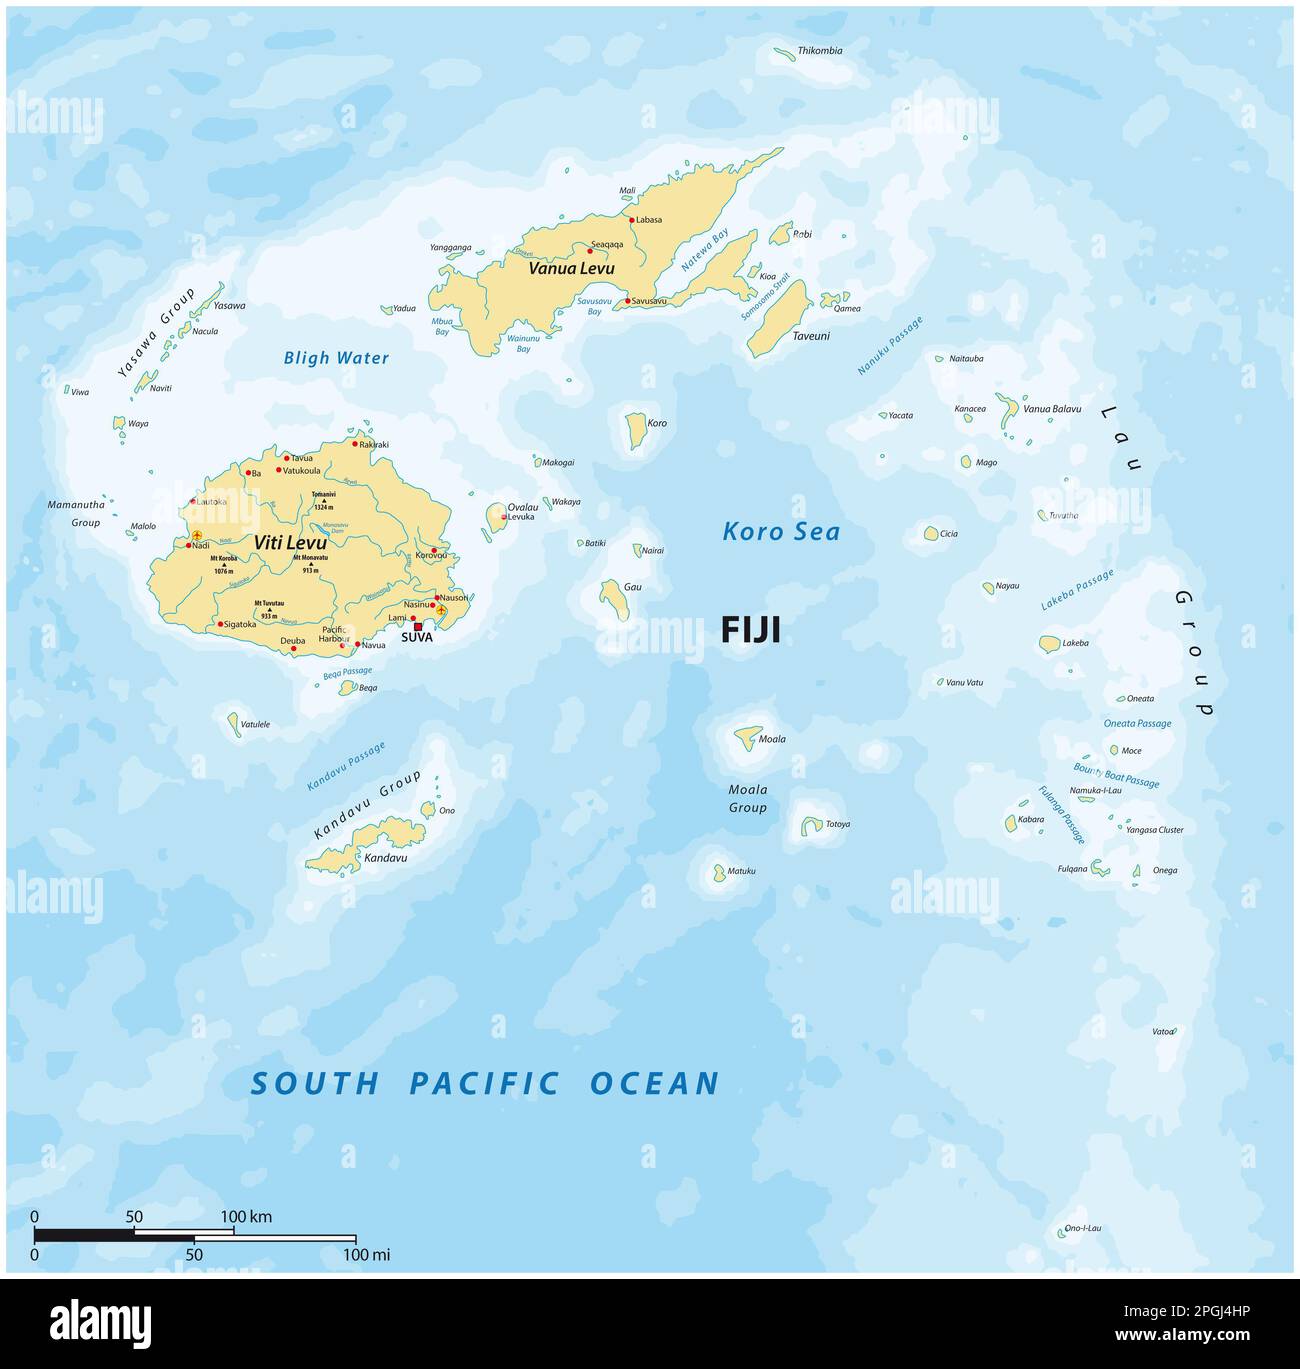 Map Of The South Pacific Island State Of Republic Fiji 2PGJ4HP 